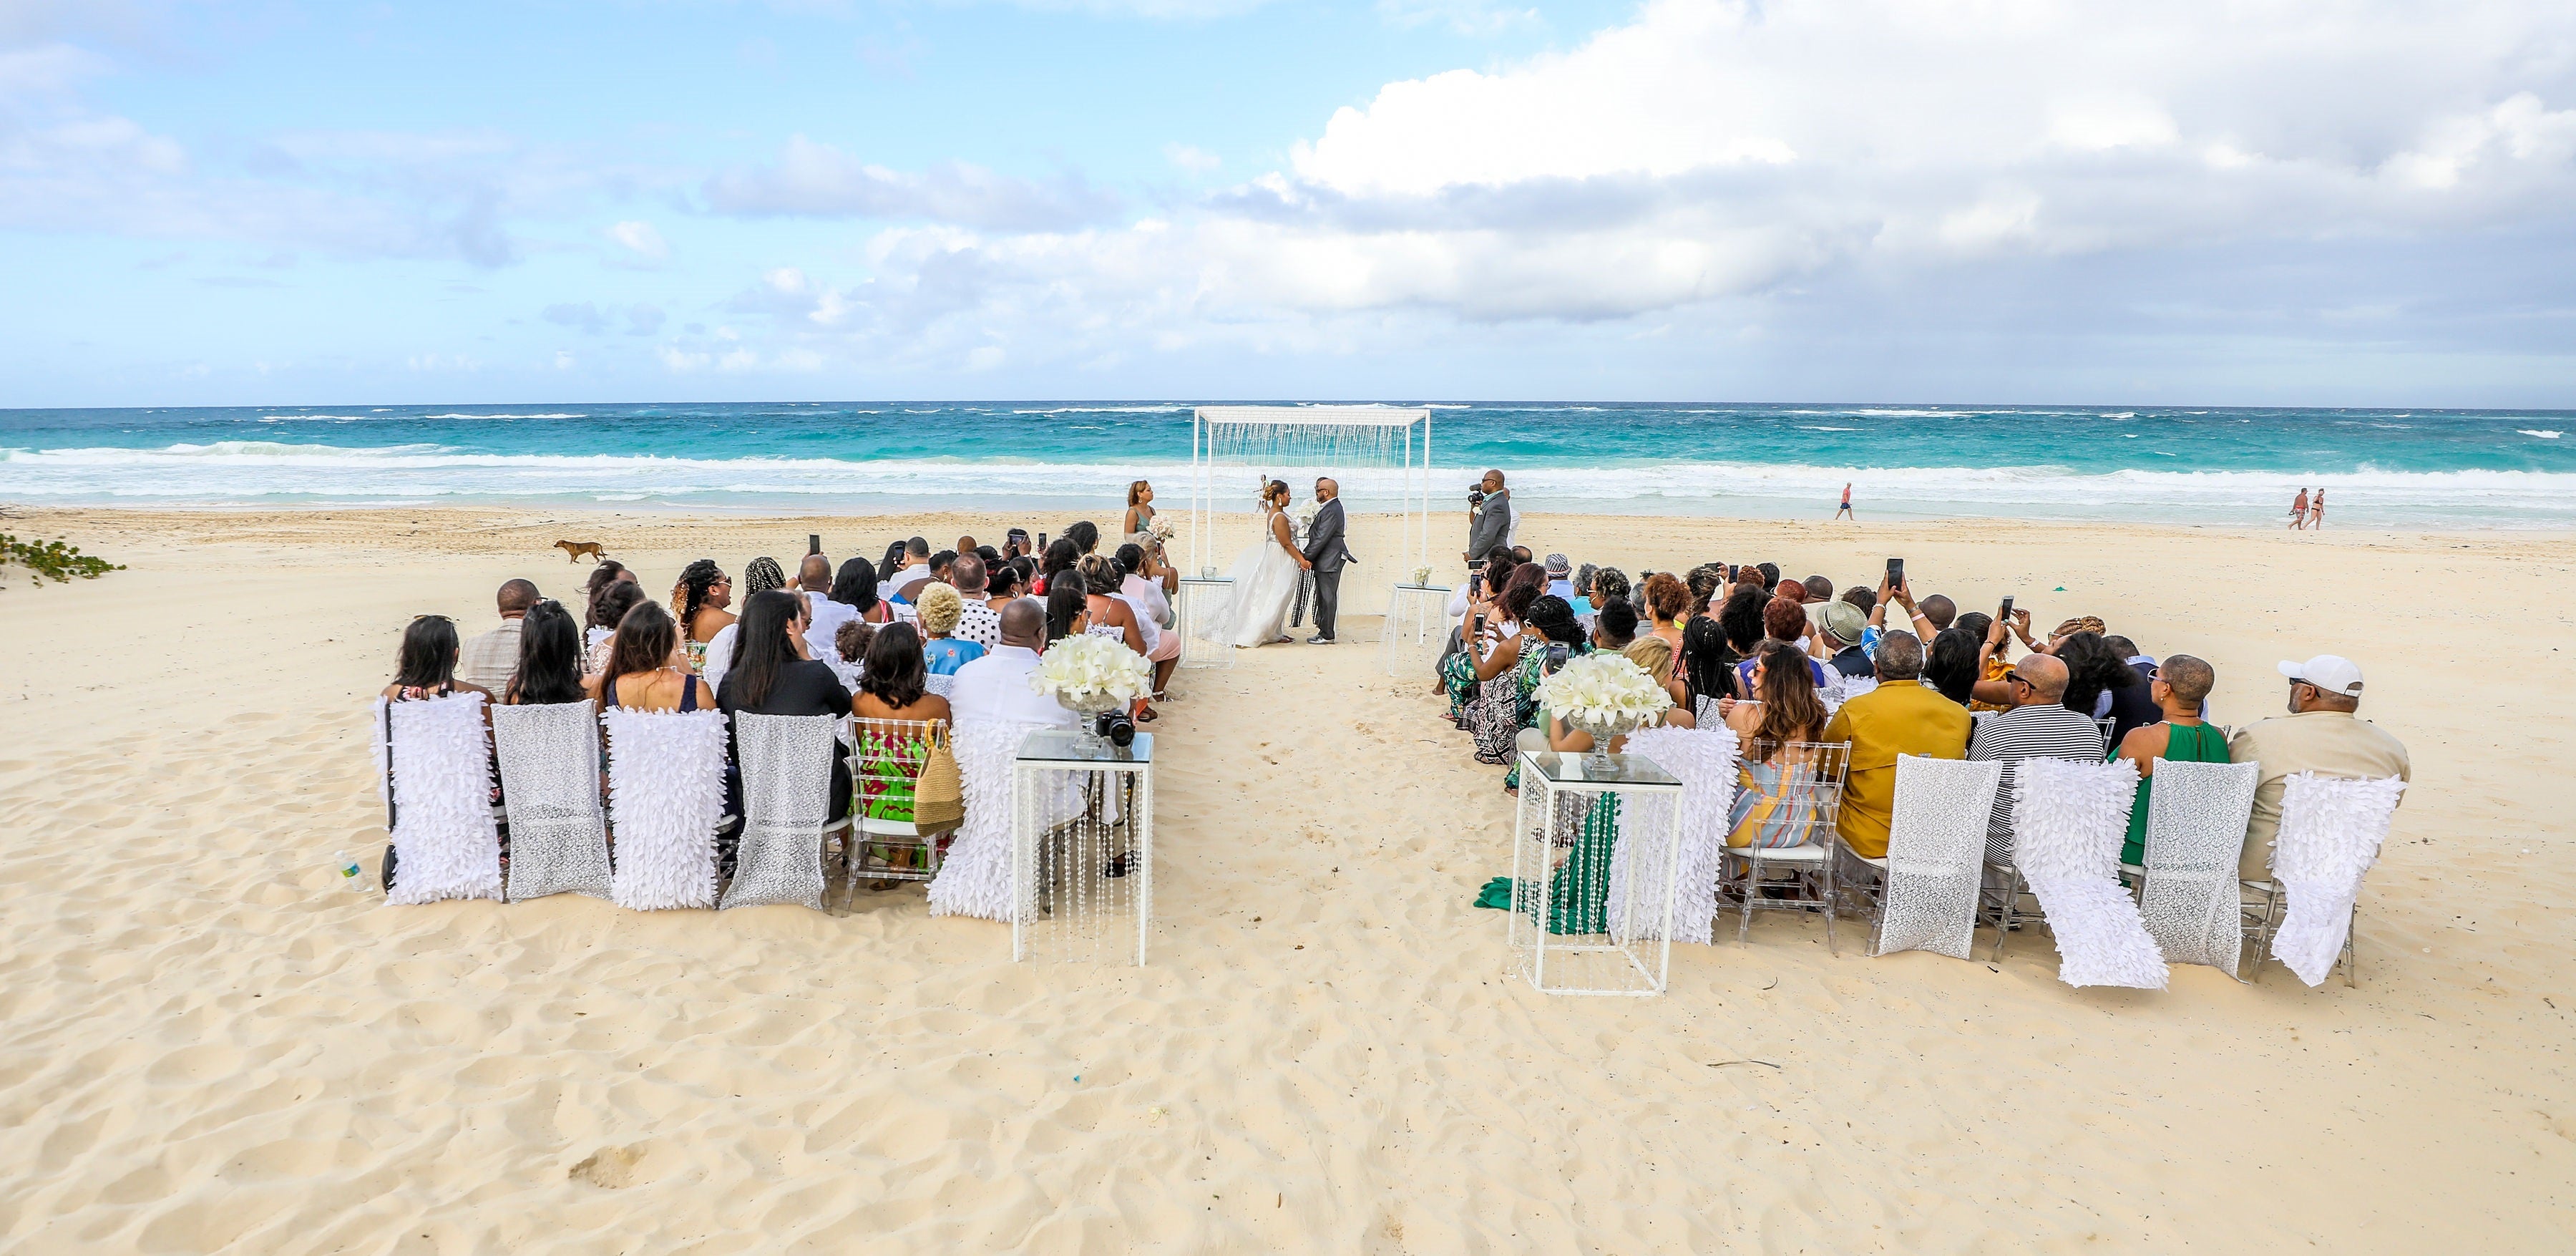 Bridal Bliss: Dorian and Darryl Did It Their Way With This Laid-Back Beach Wedding